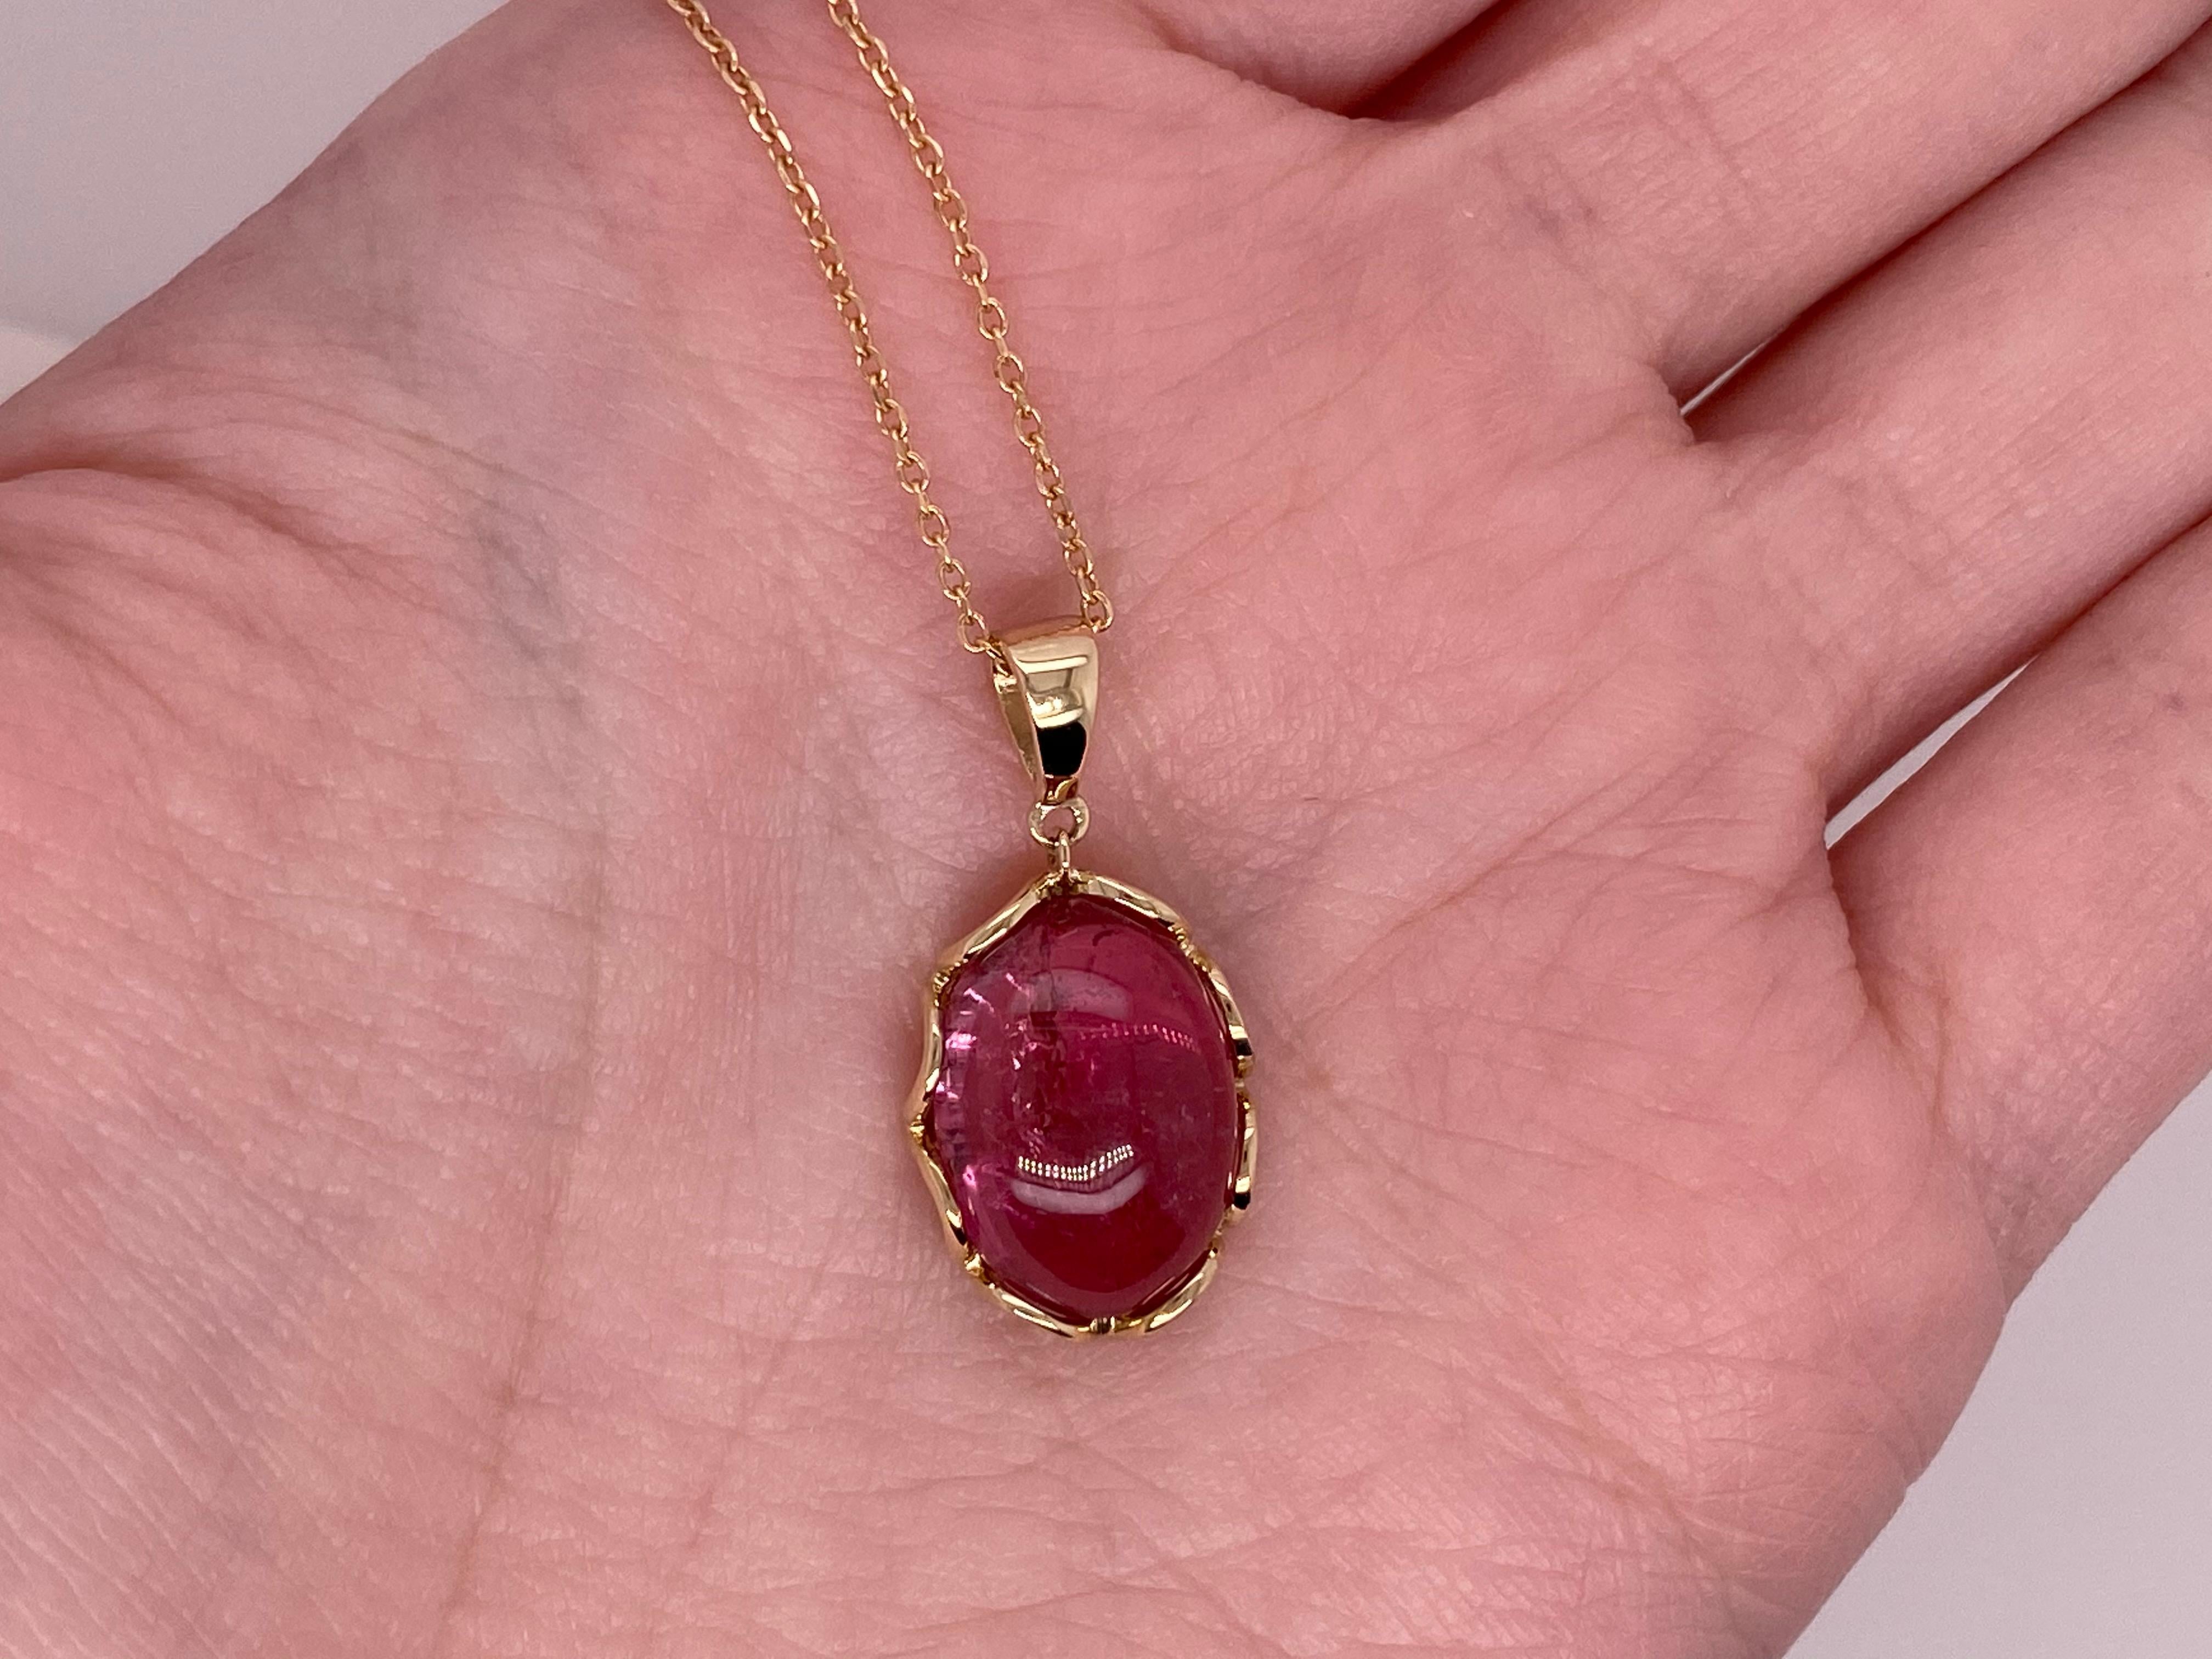 5.81 Carat Cabochon Dark Pink Tourmaline Pendant in 14 Karat Yellow Gold, Chain In New Condition For Sale In Houston, TX